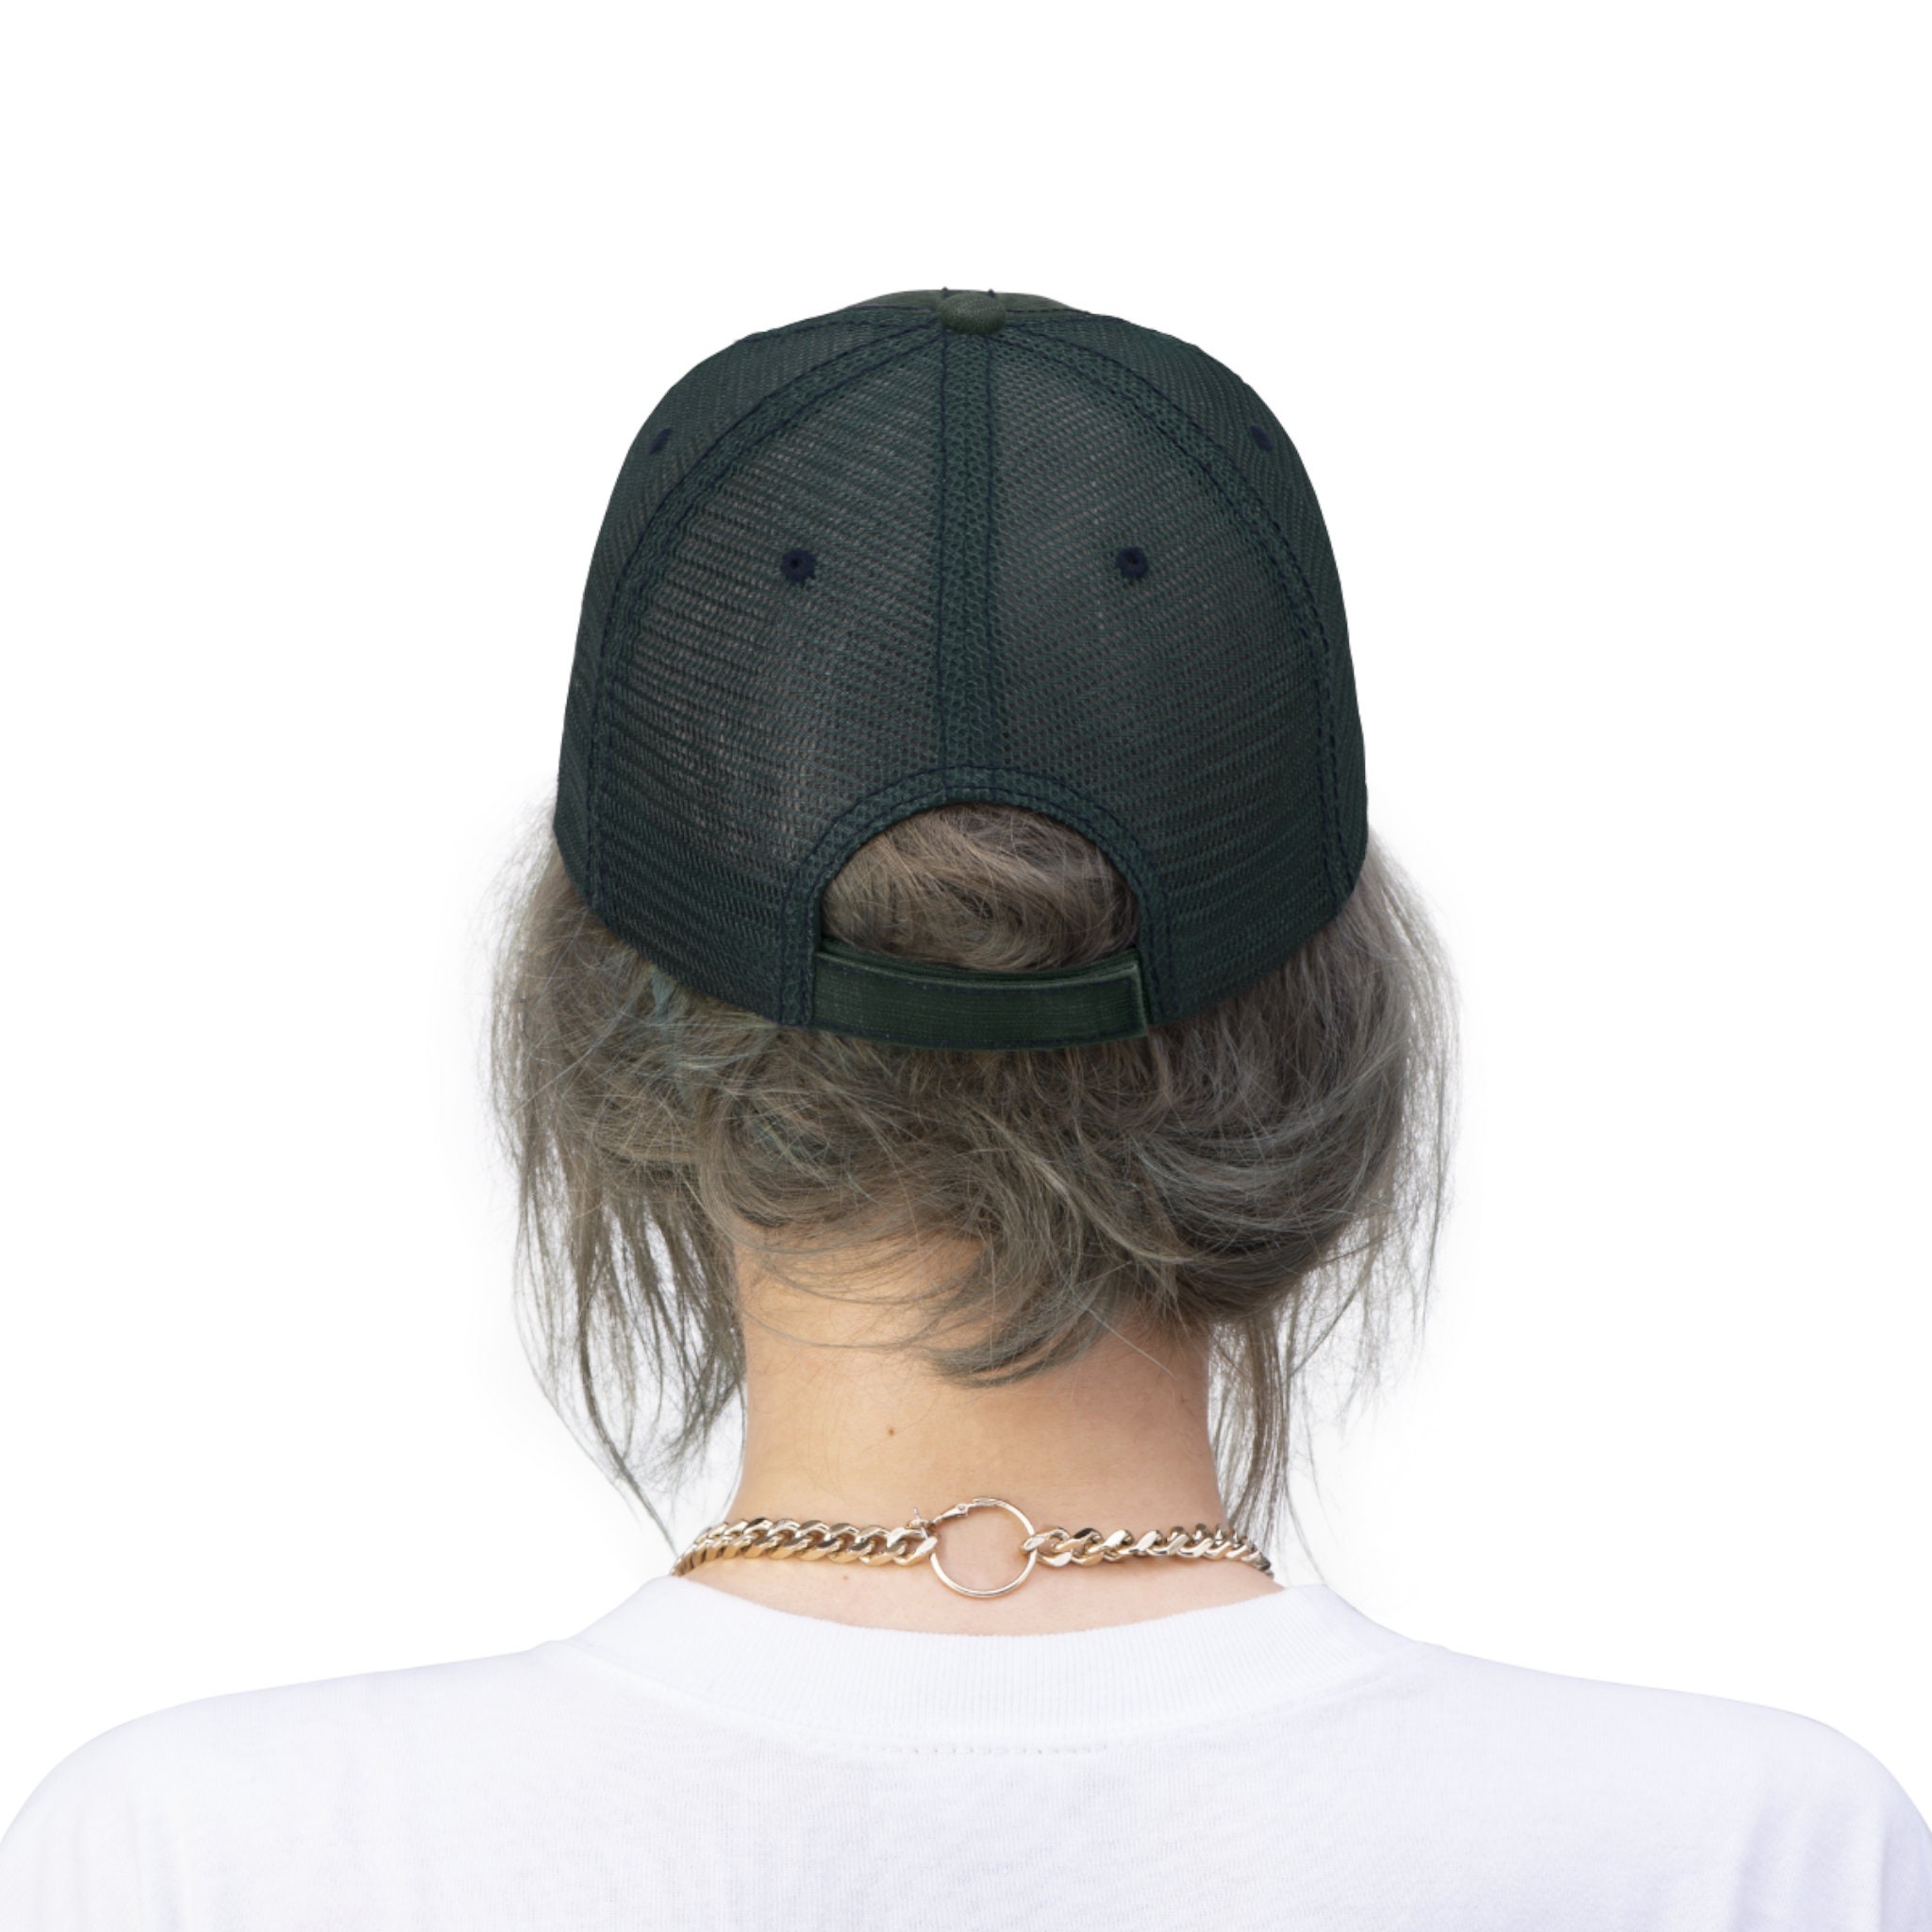 Discover Unisex Trucker Hat | Rock Band FF